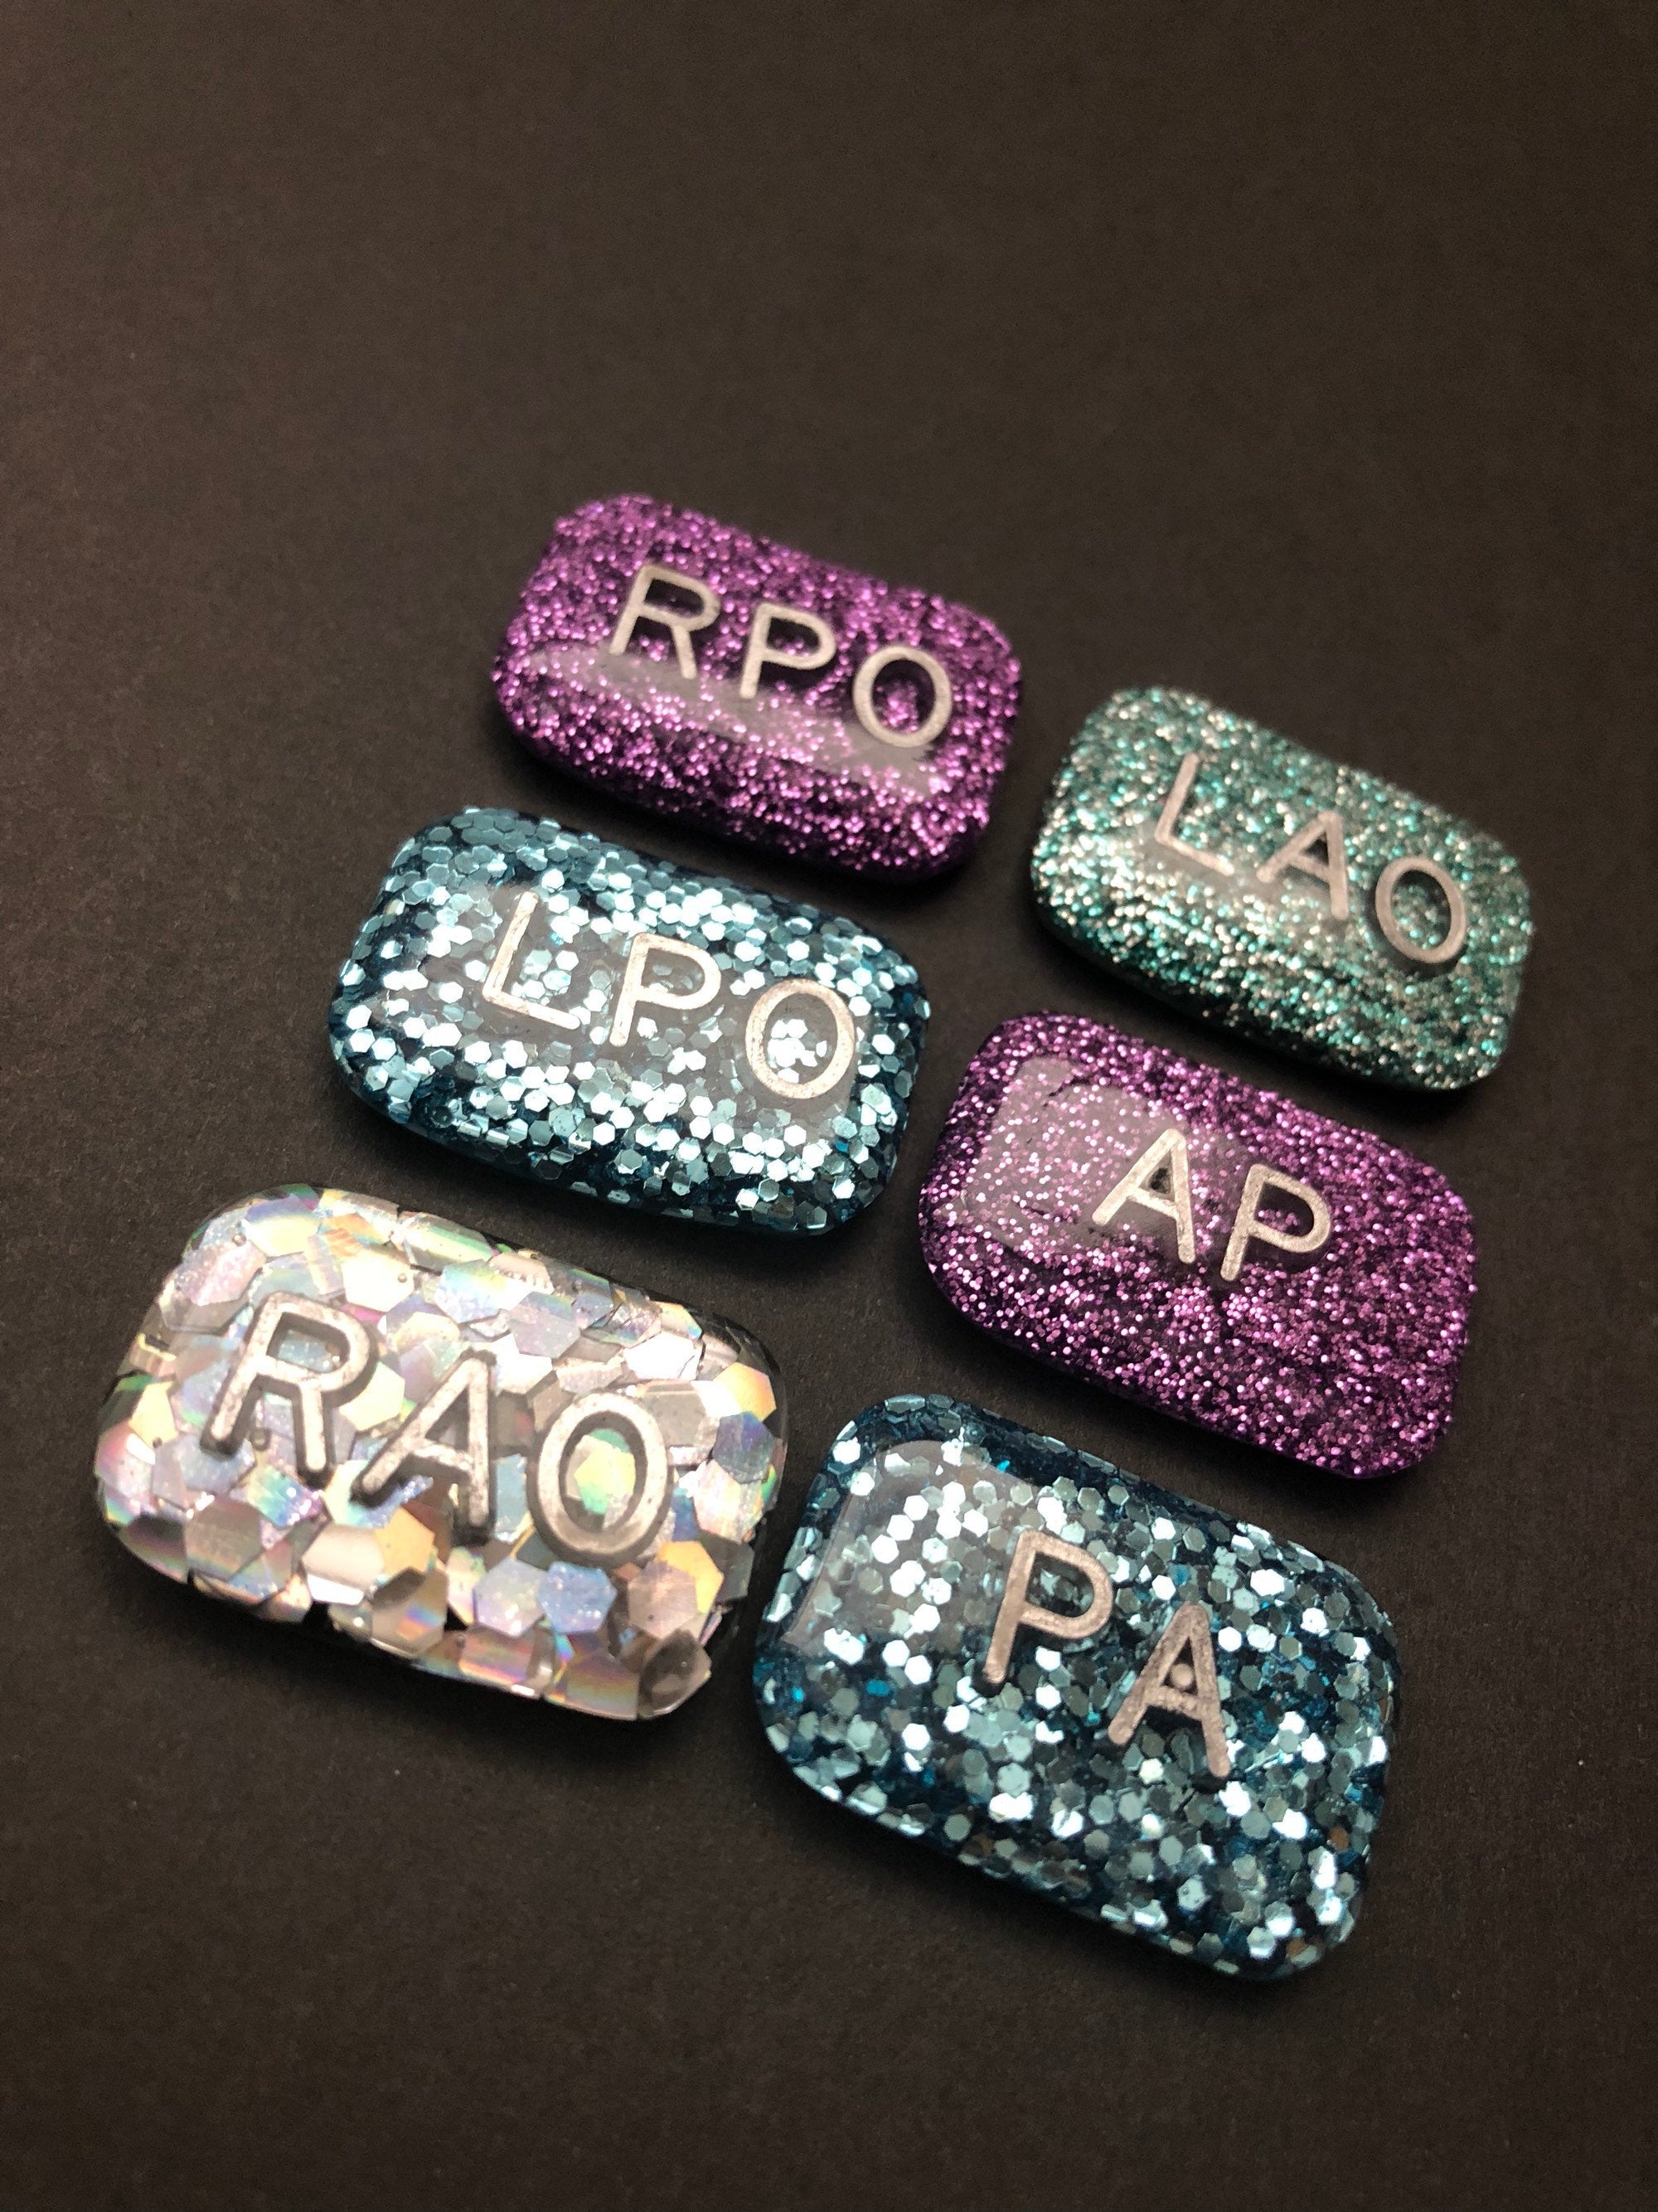 Rao Rpo Lao Lpo, Ap, Pa, Positional Xray Markers, Rectangle, Glitter, X-ray Markers, Position Indicator